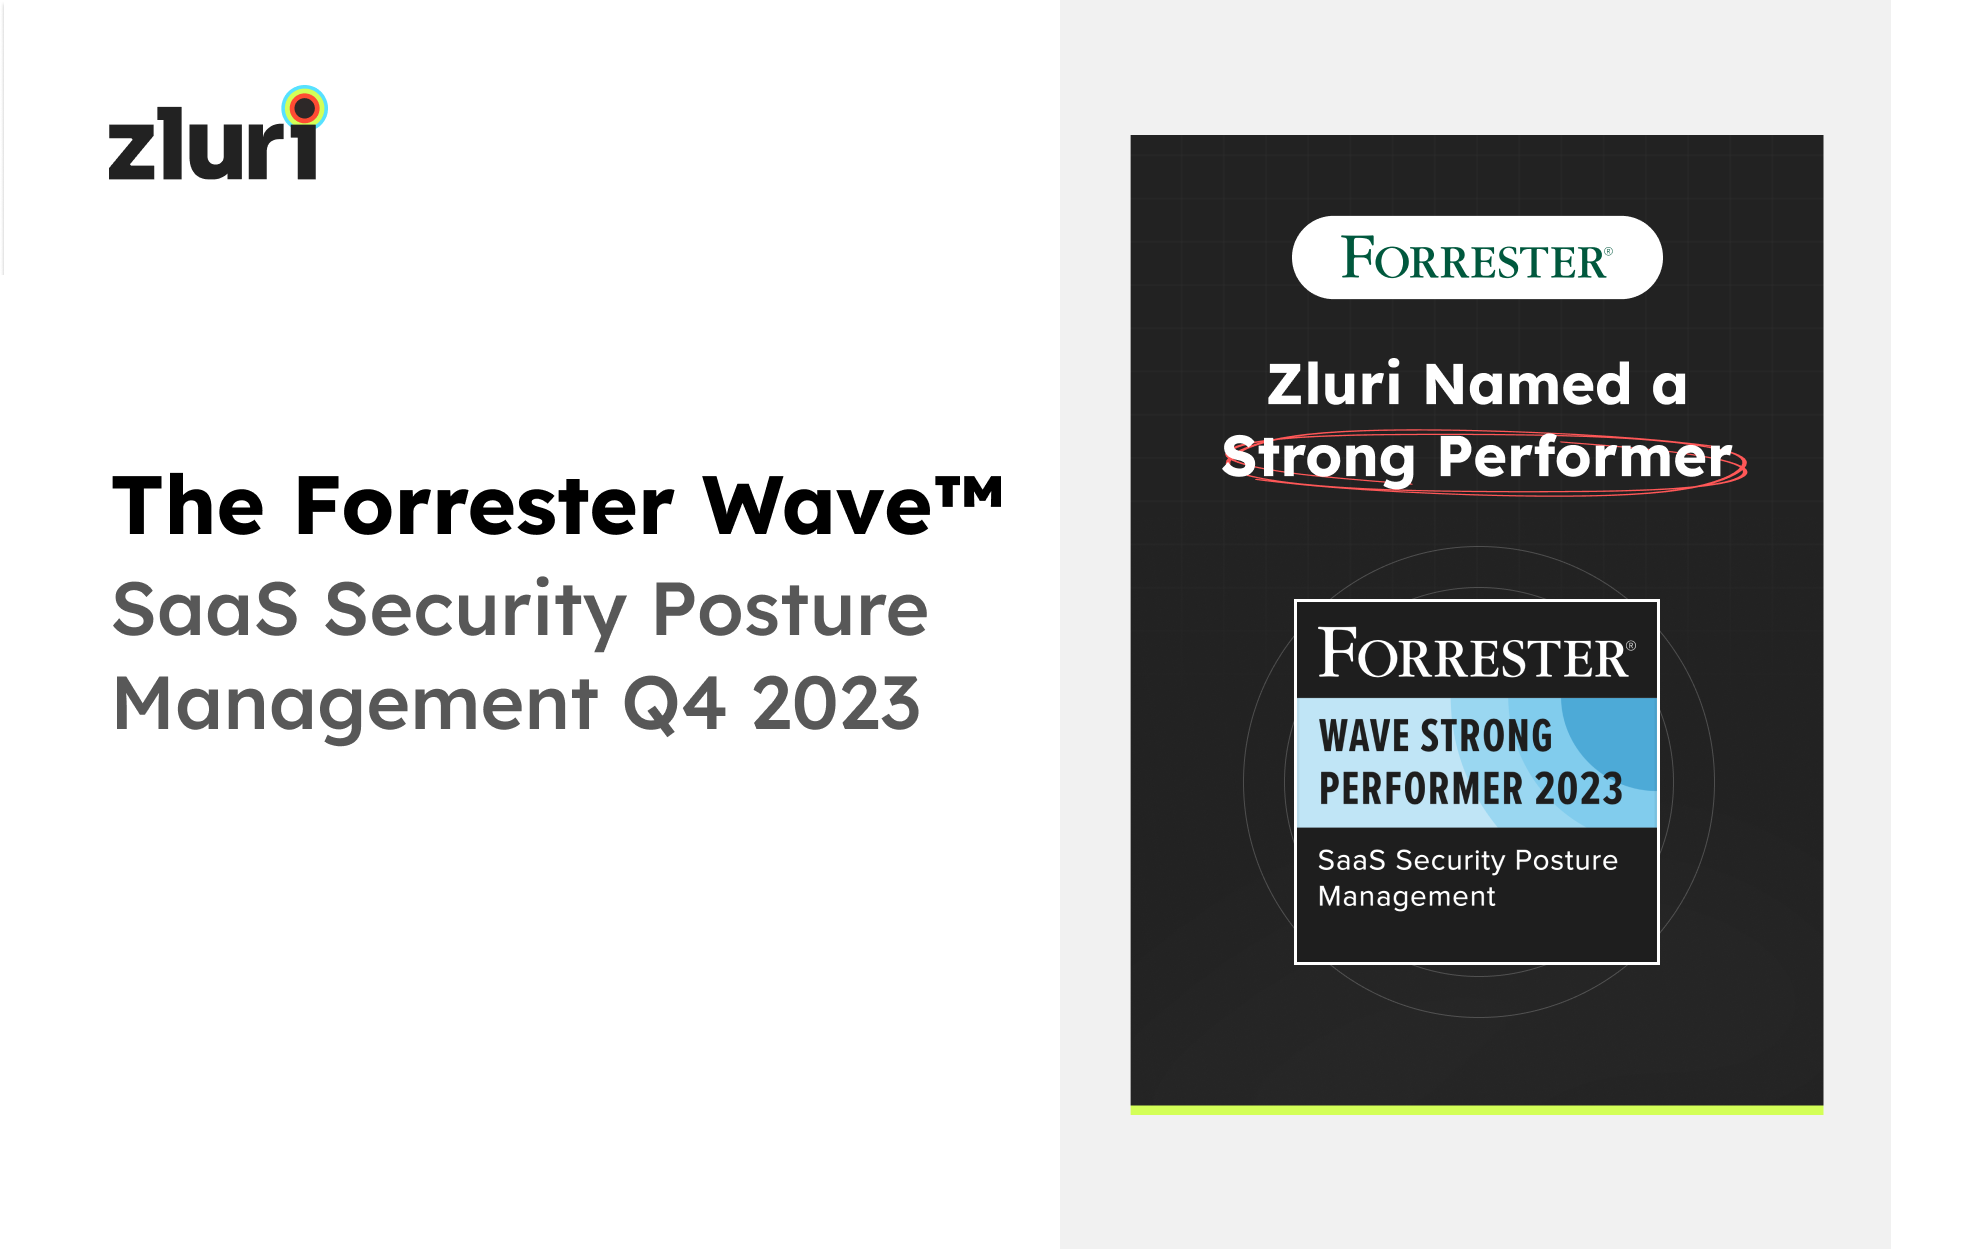 The Forrester Wave: SaaS Security Posture Management, Q4 2023- Featured Shot